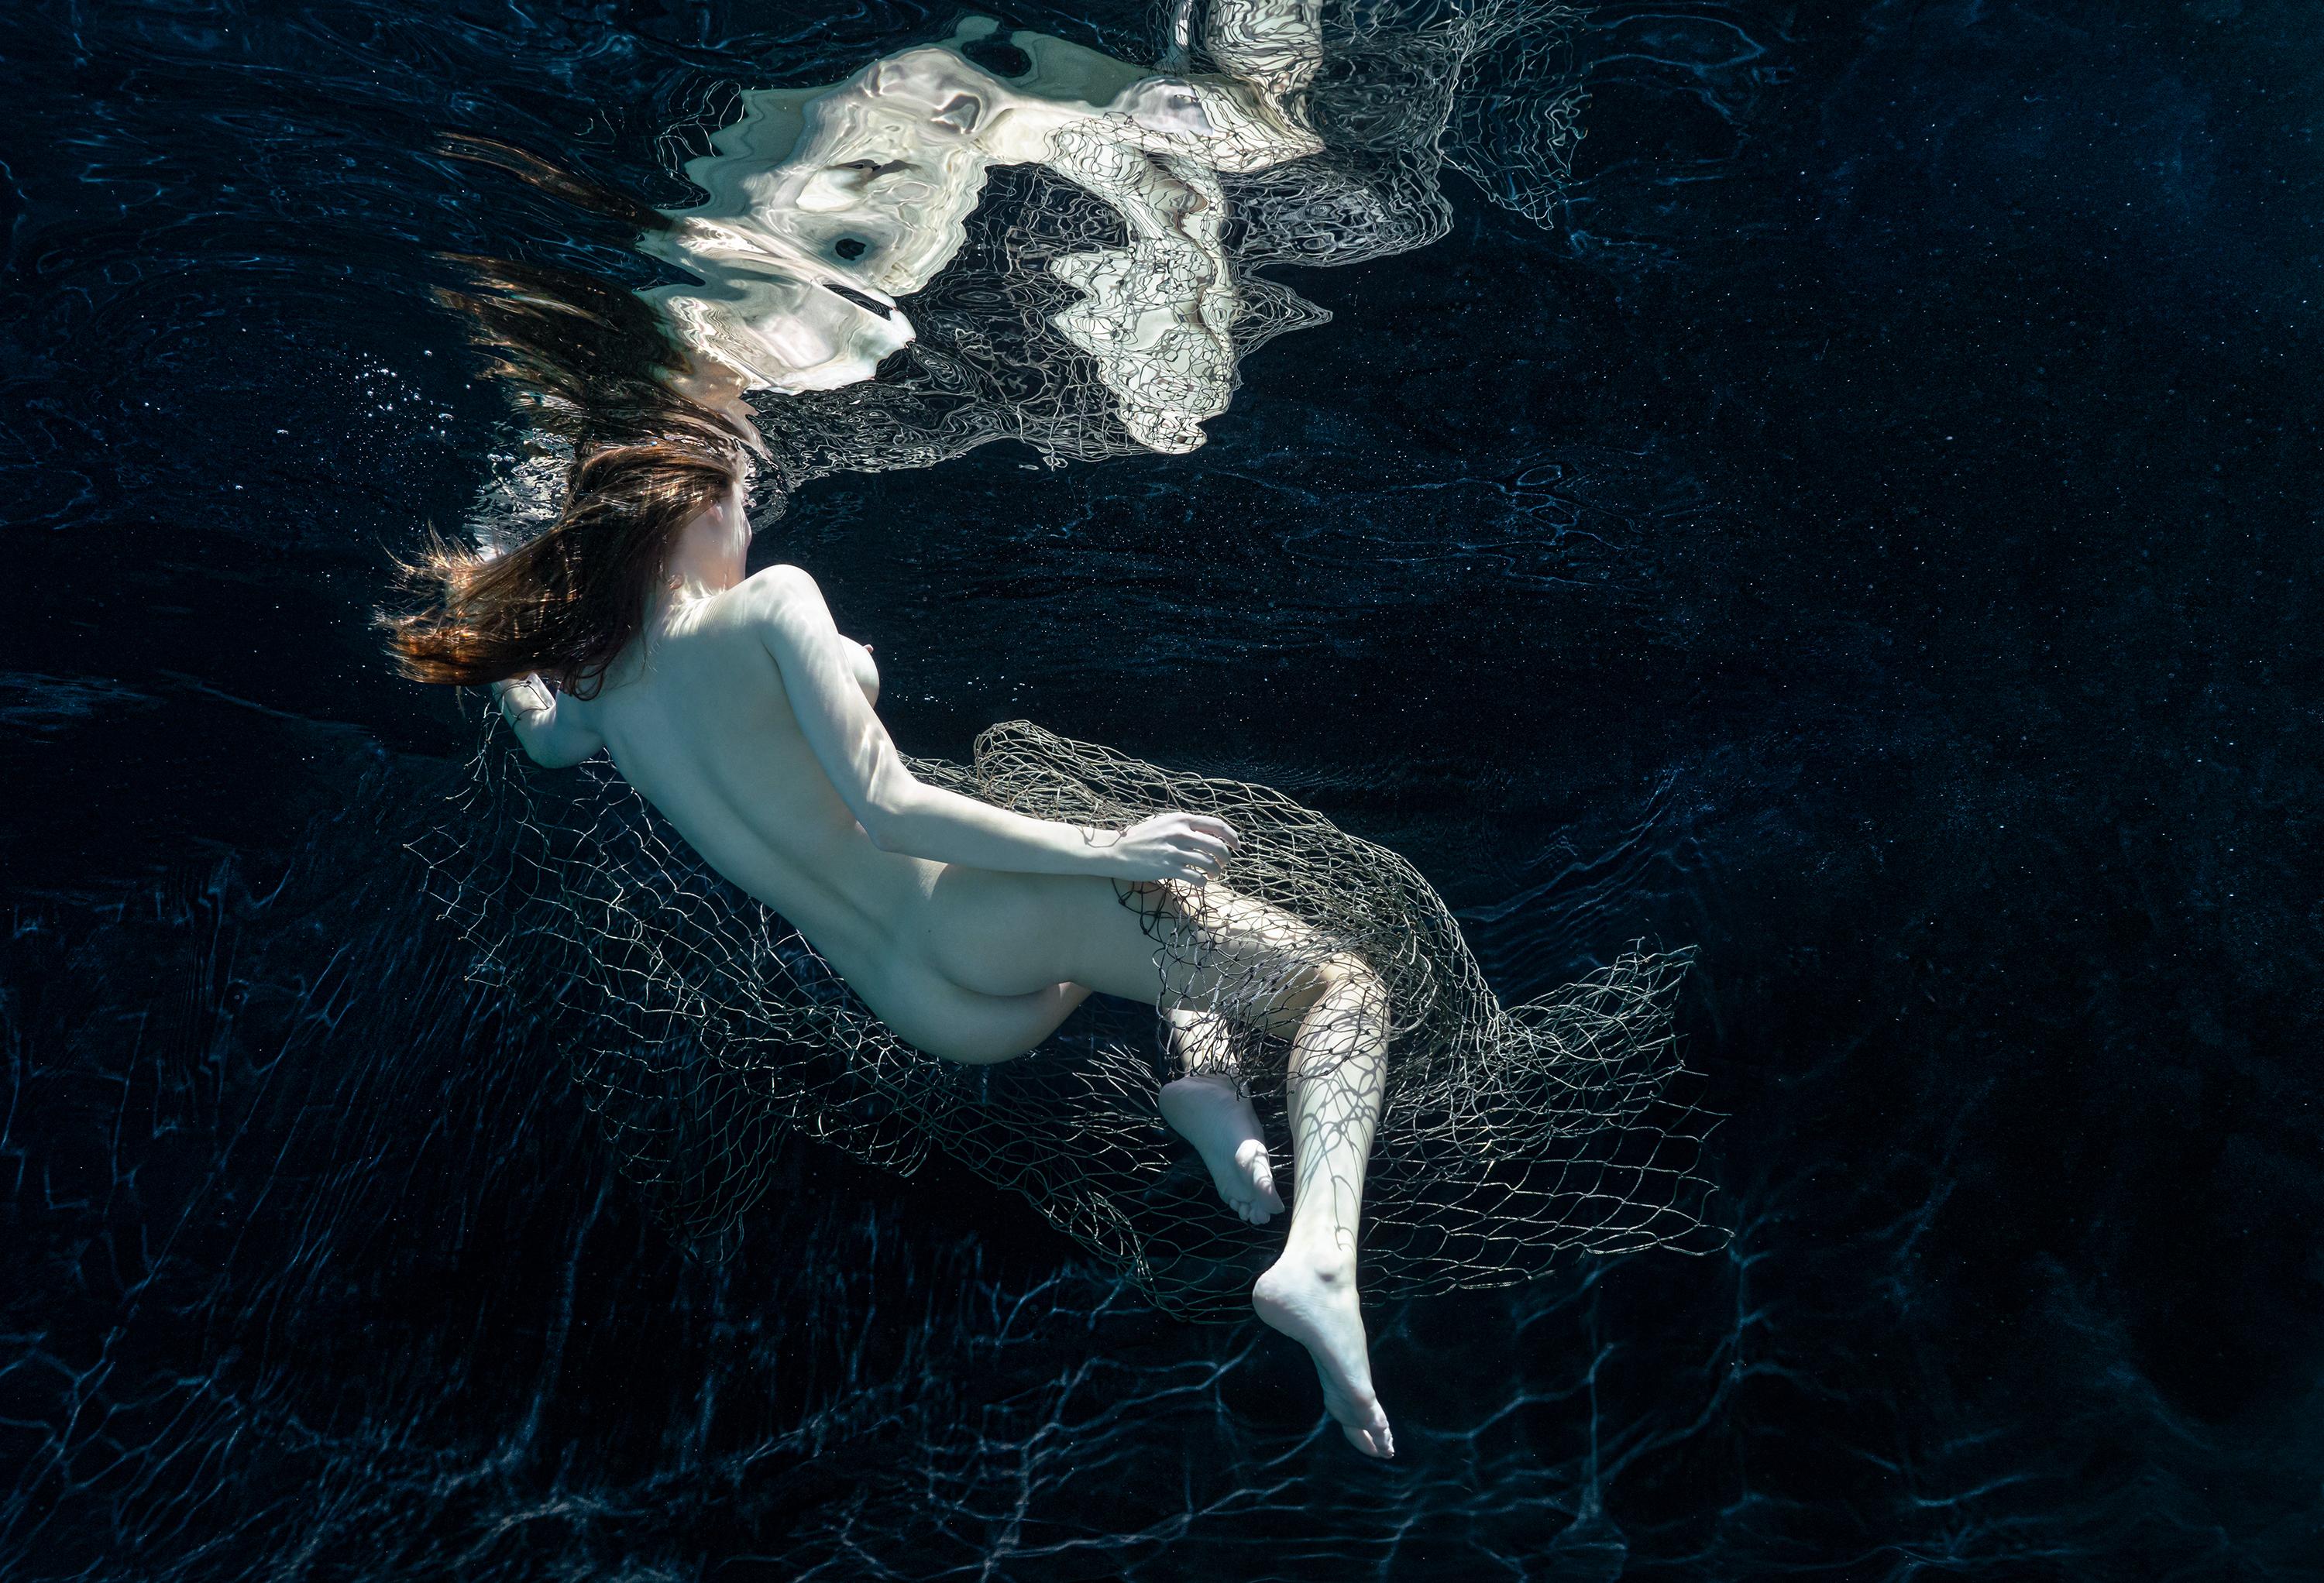 Alex Sher Nude Photograph - Constellation - underwater nude photograph - archival pigment print 16x24"